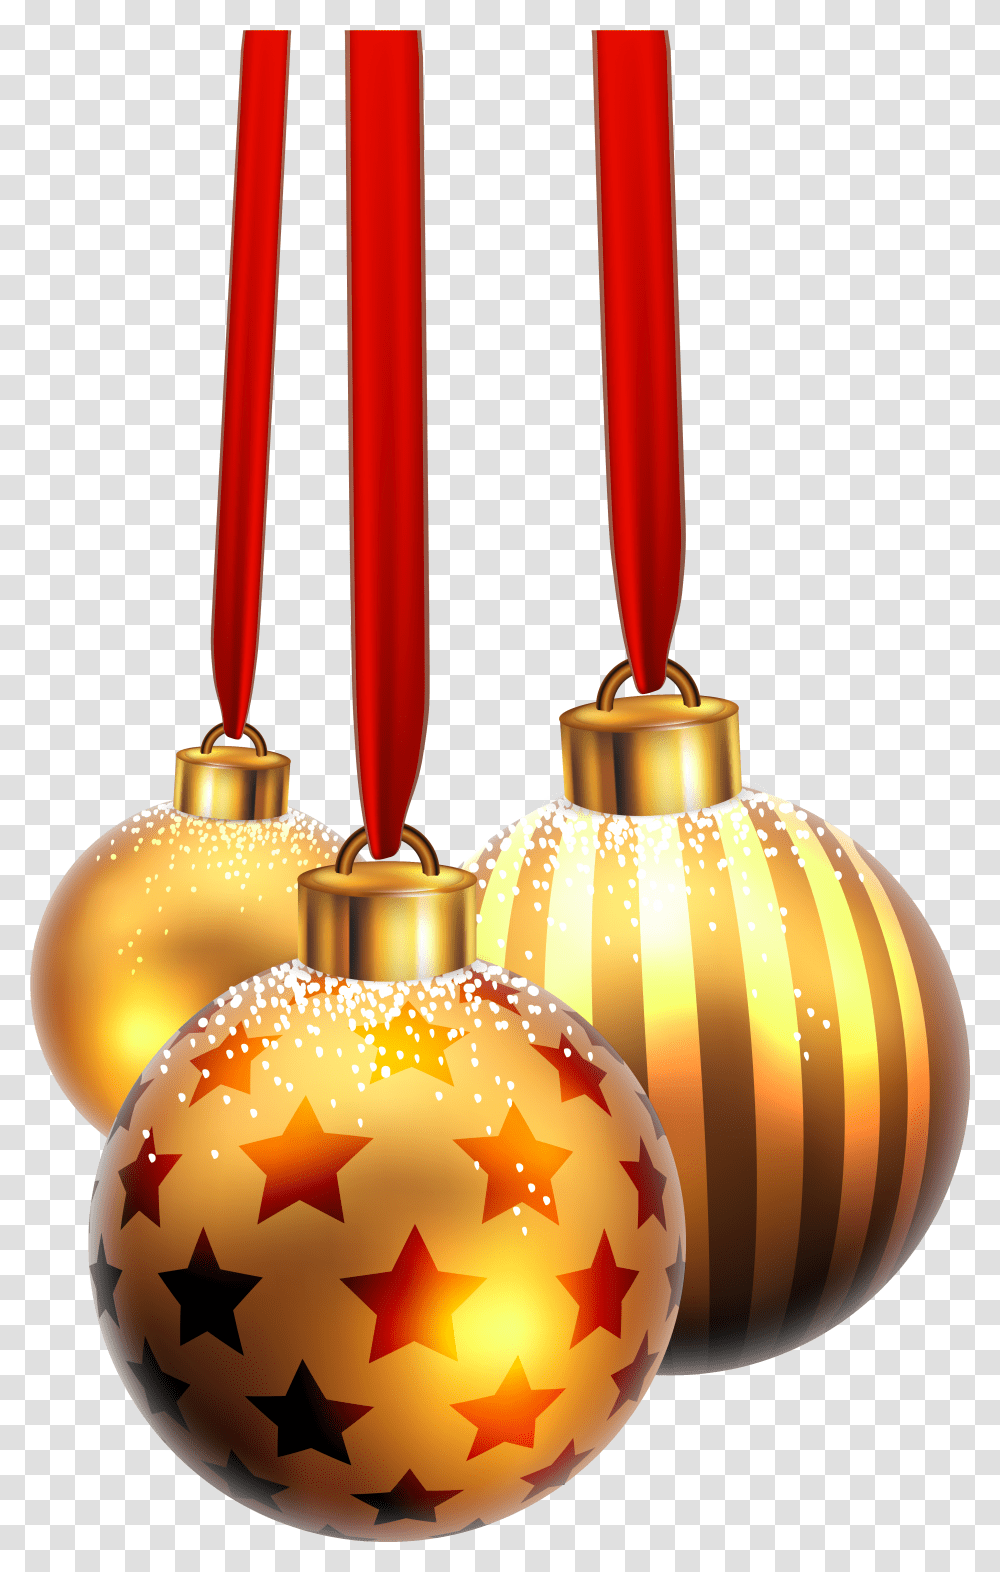 Download Free Christmas Balls With Christmas Snow Balls, Lamp, Ornament, Candle Transparent Png